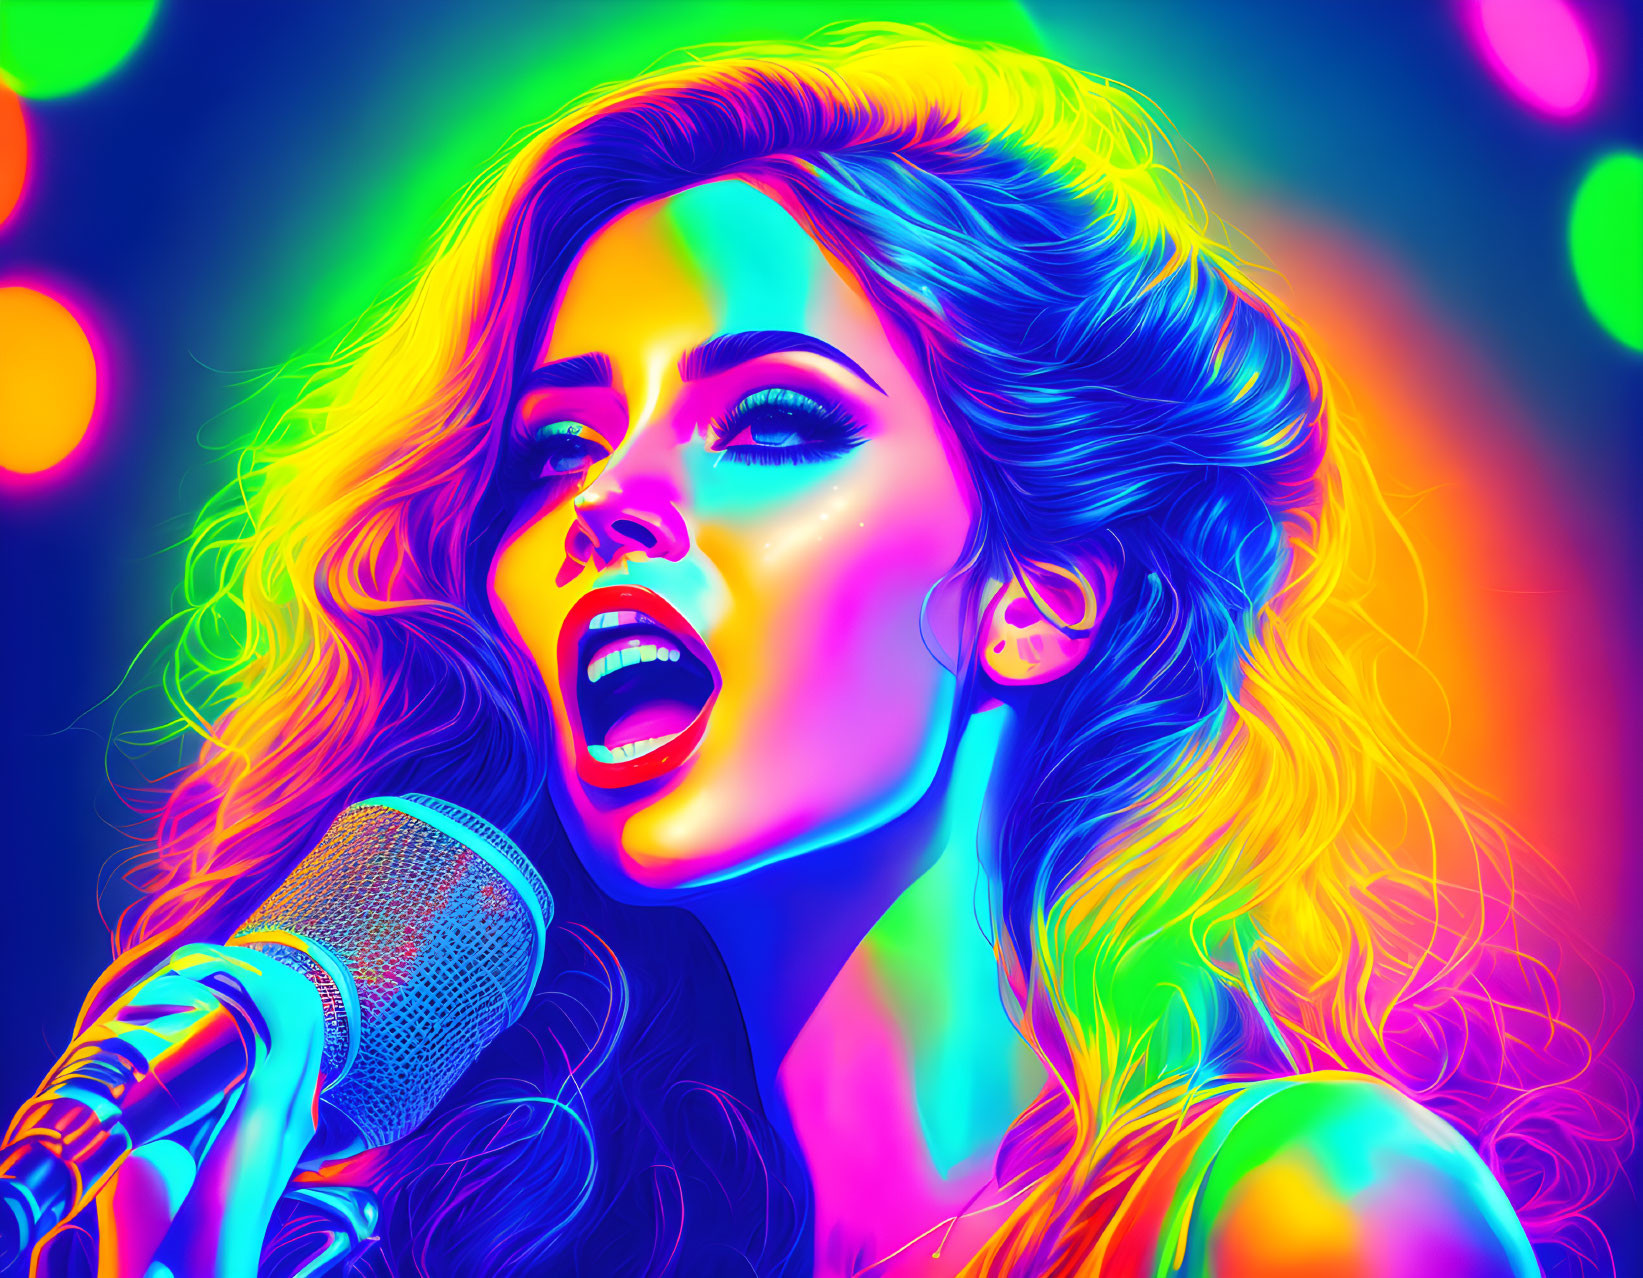 Colorful Neon Illustration of Woman Singing with Bokeh Lights